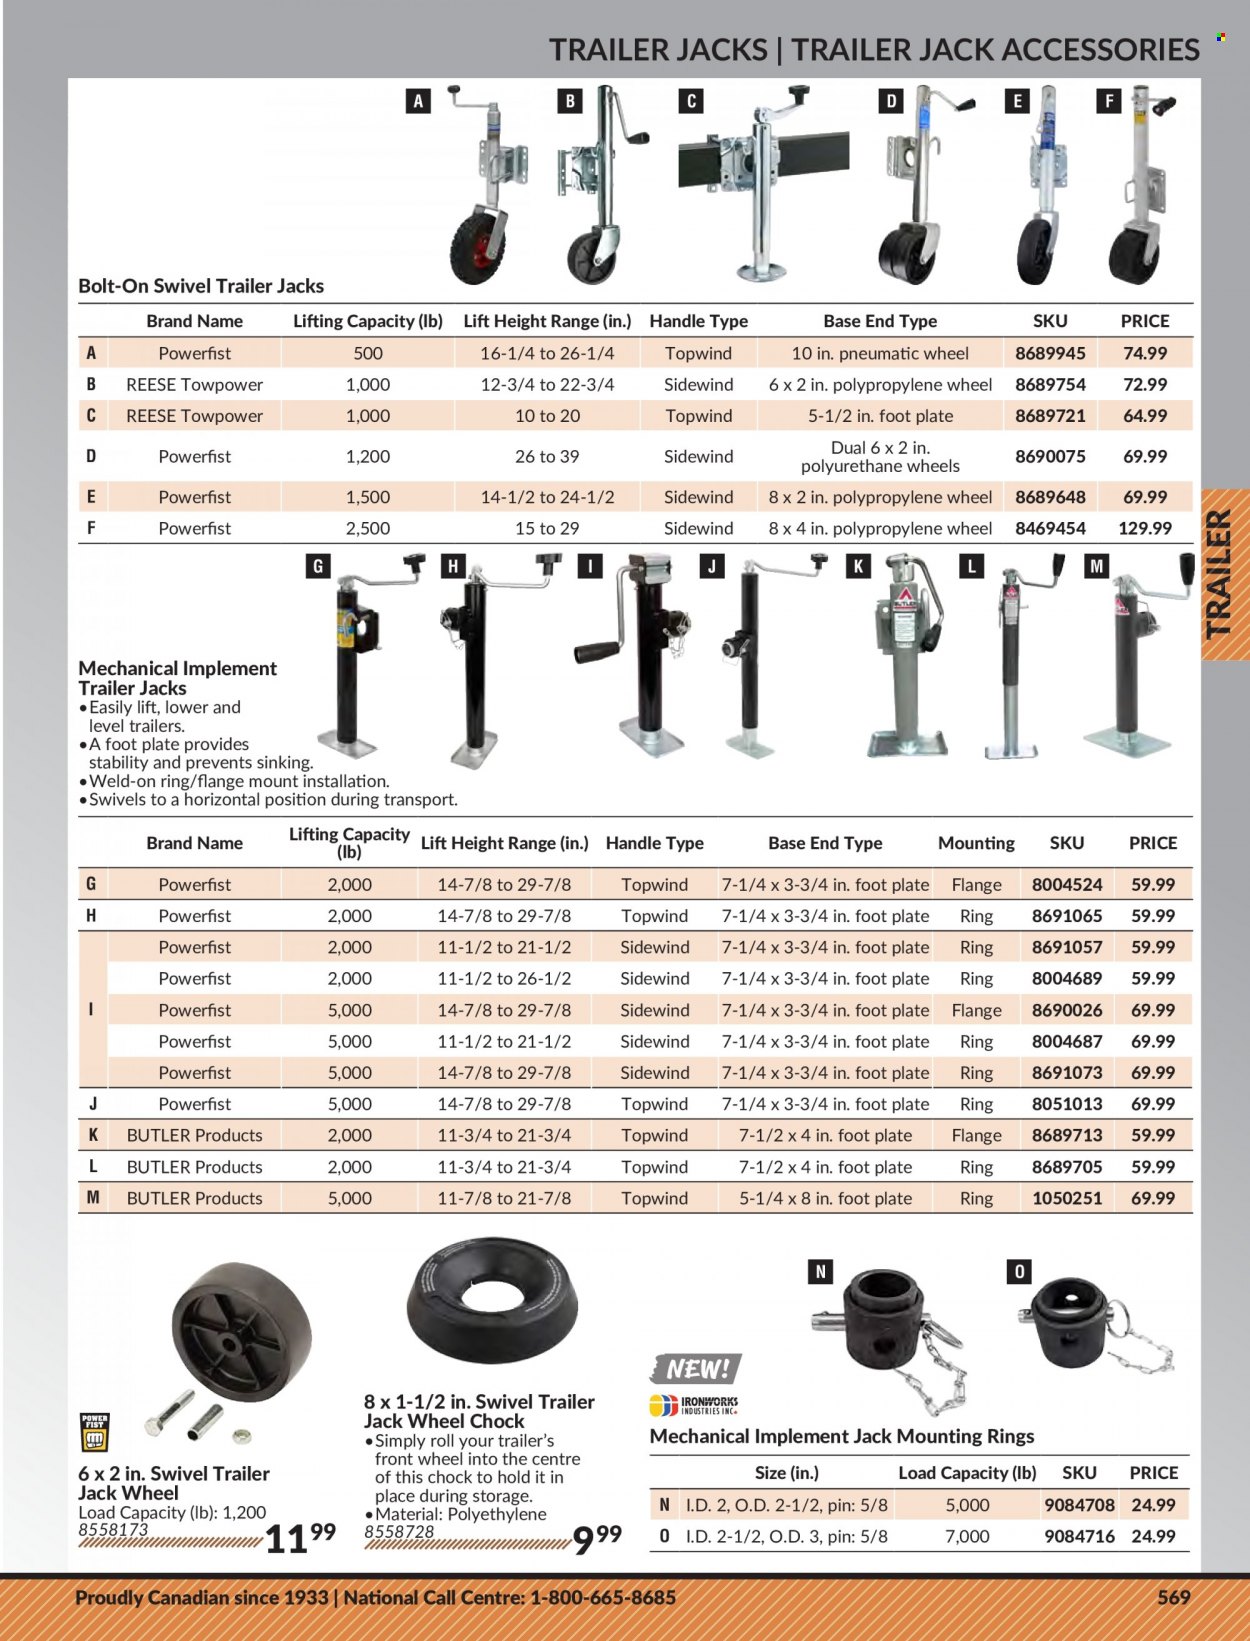 Princess Auto Flyer - Sales products - Reese Towpower. Page 579.